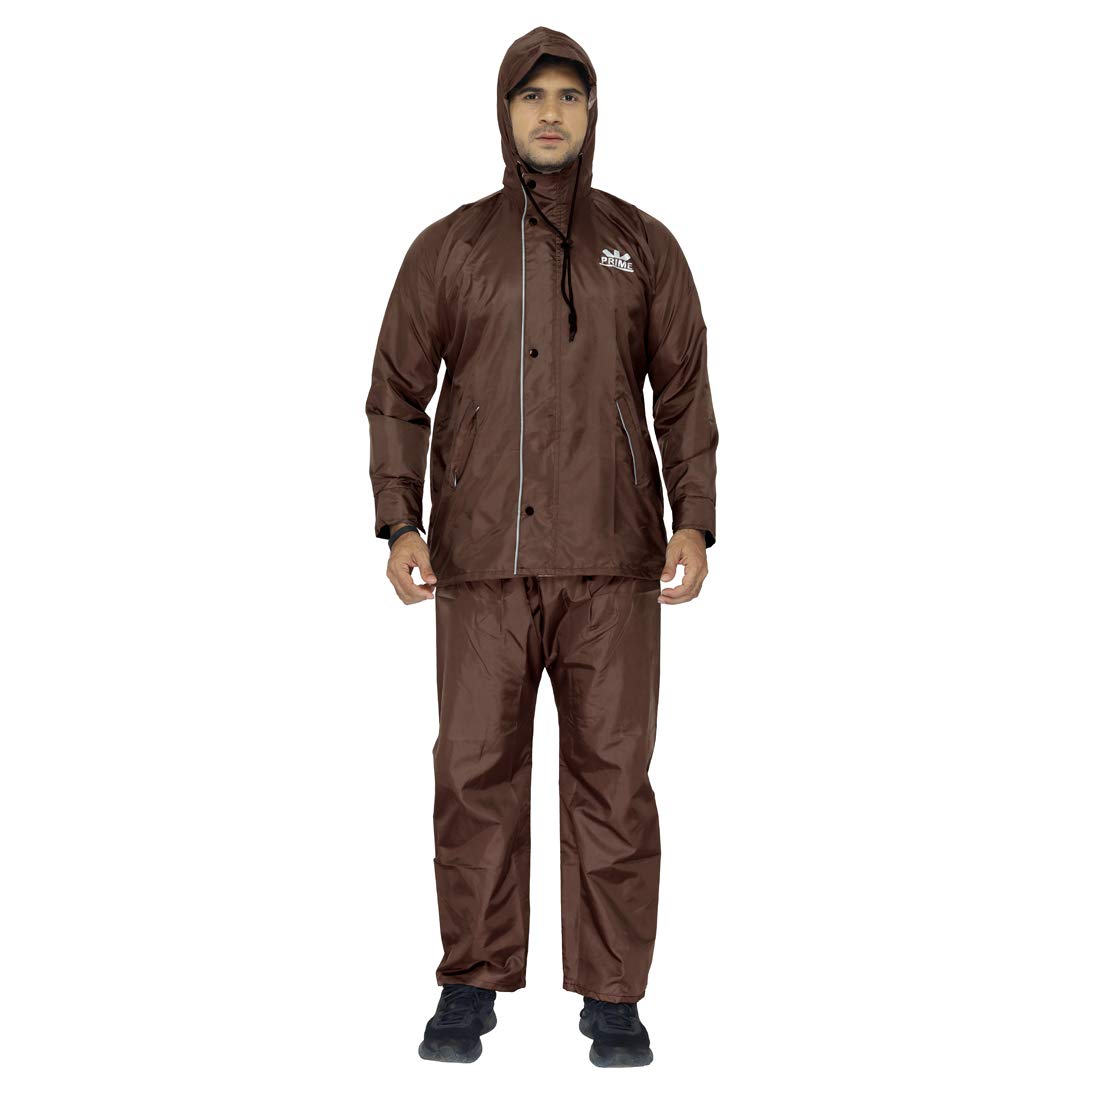 THE CLOWNFISH Prime Series Reversible Men's Polyester Double Layer Waterproof Raincoat with Hood and Reflector logo at Back for Night Travelling (Prime Brown, 2x_l)